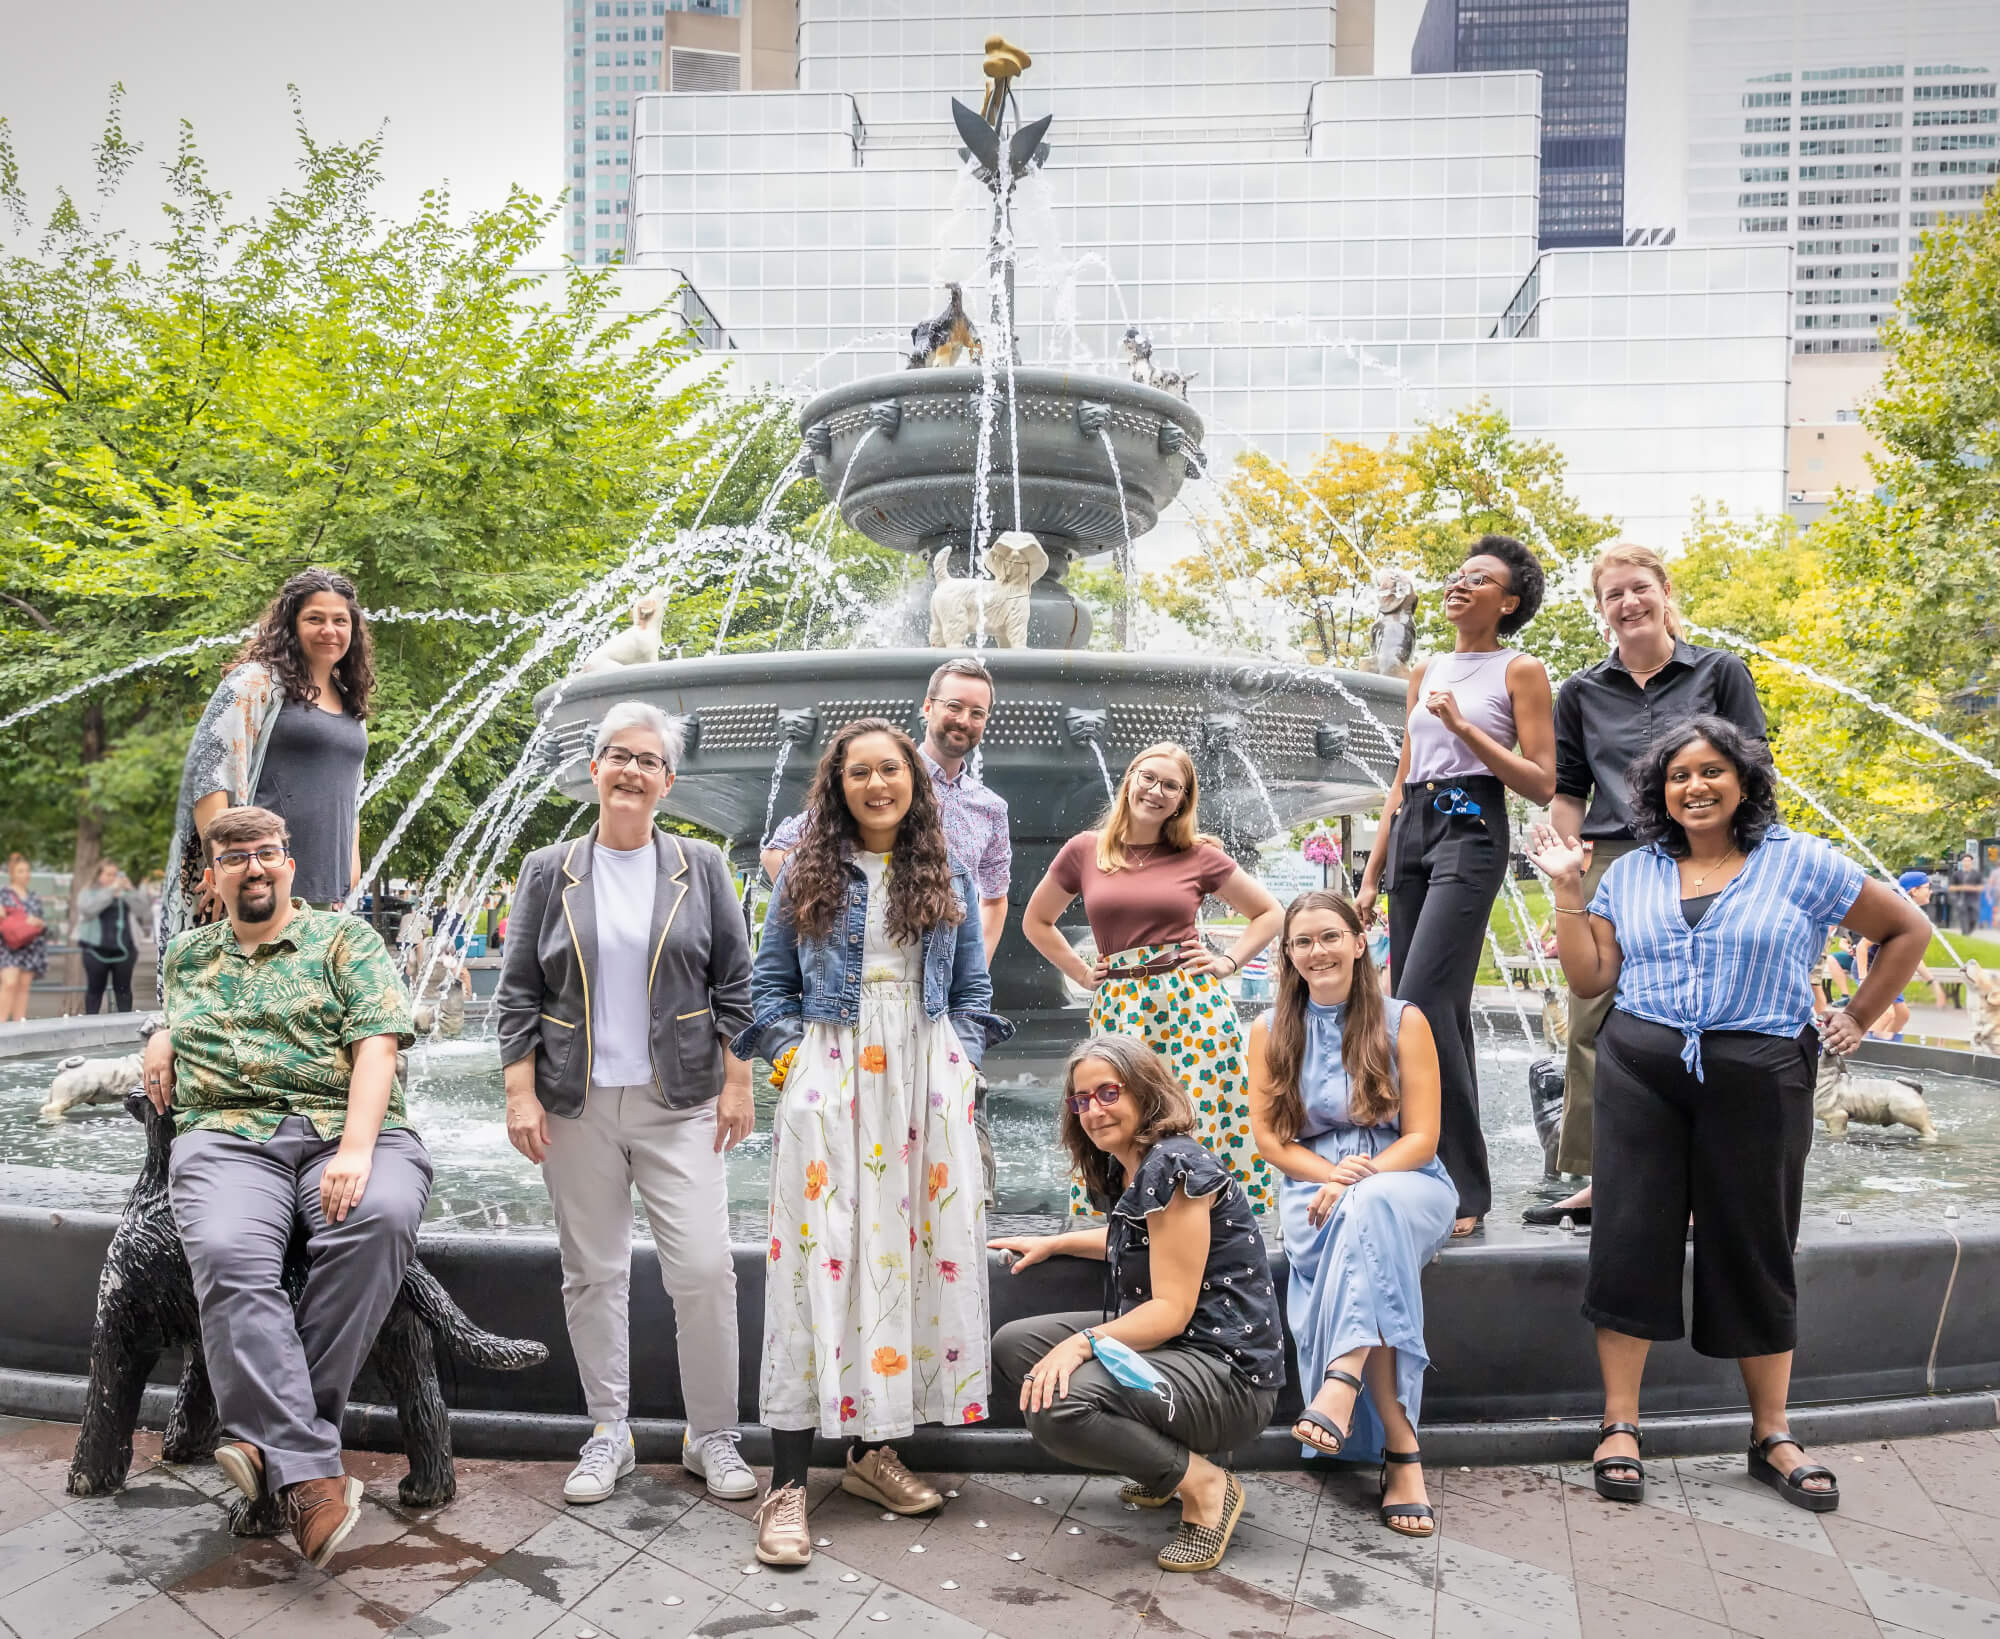 Group of people standing in front of a fountain in a park smiling at the camera.